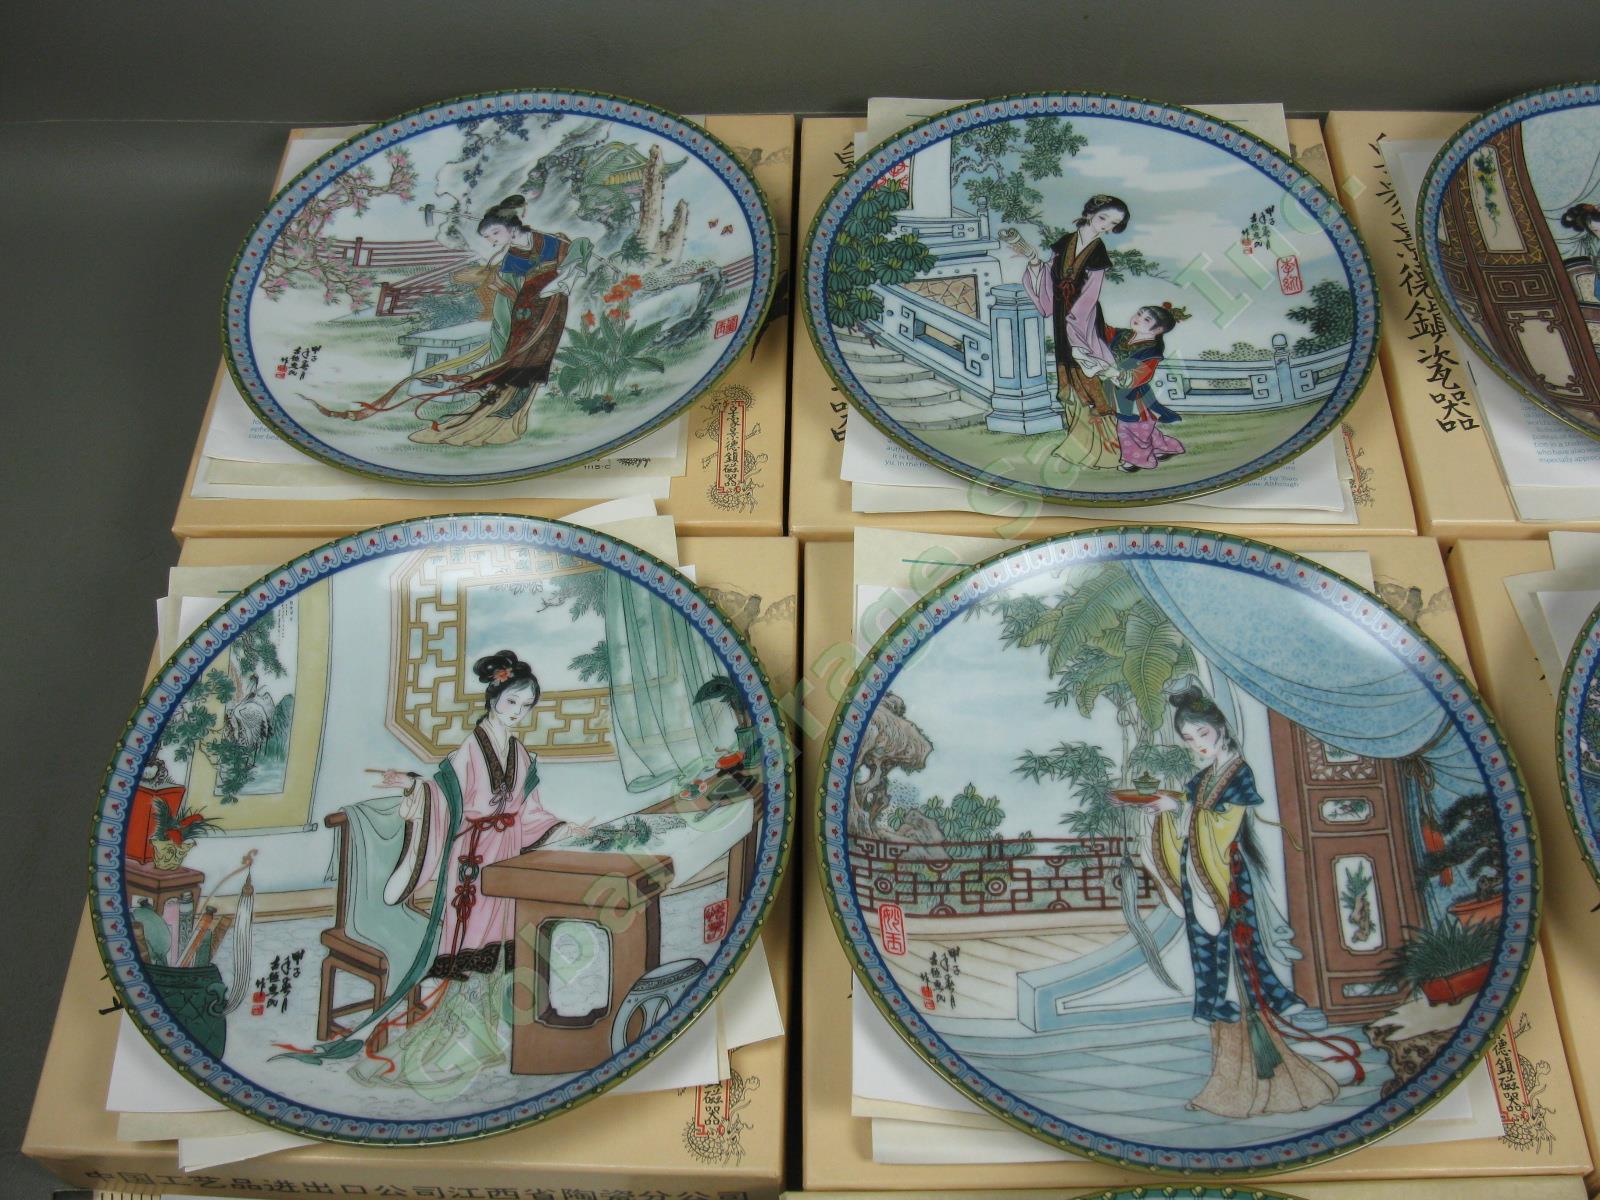 8 Imperial Jingdezhen Beauties Of The Red Mansion Porcelain Plates +COAs Box Lot 2